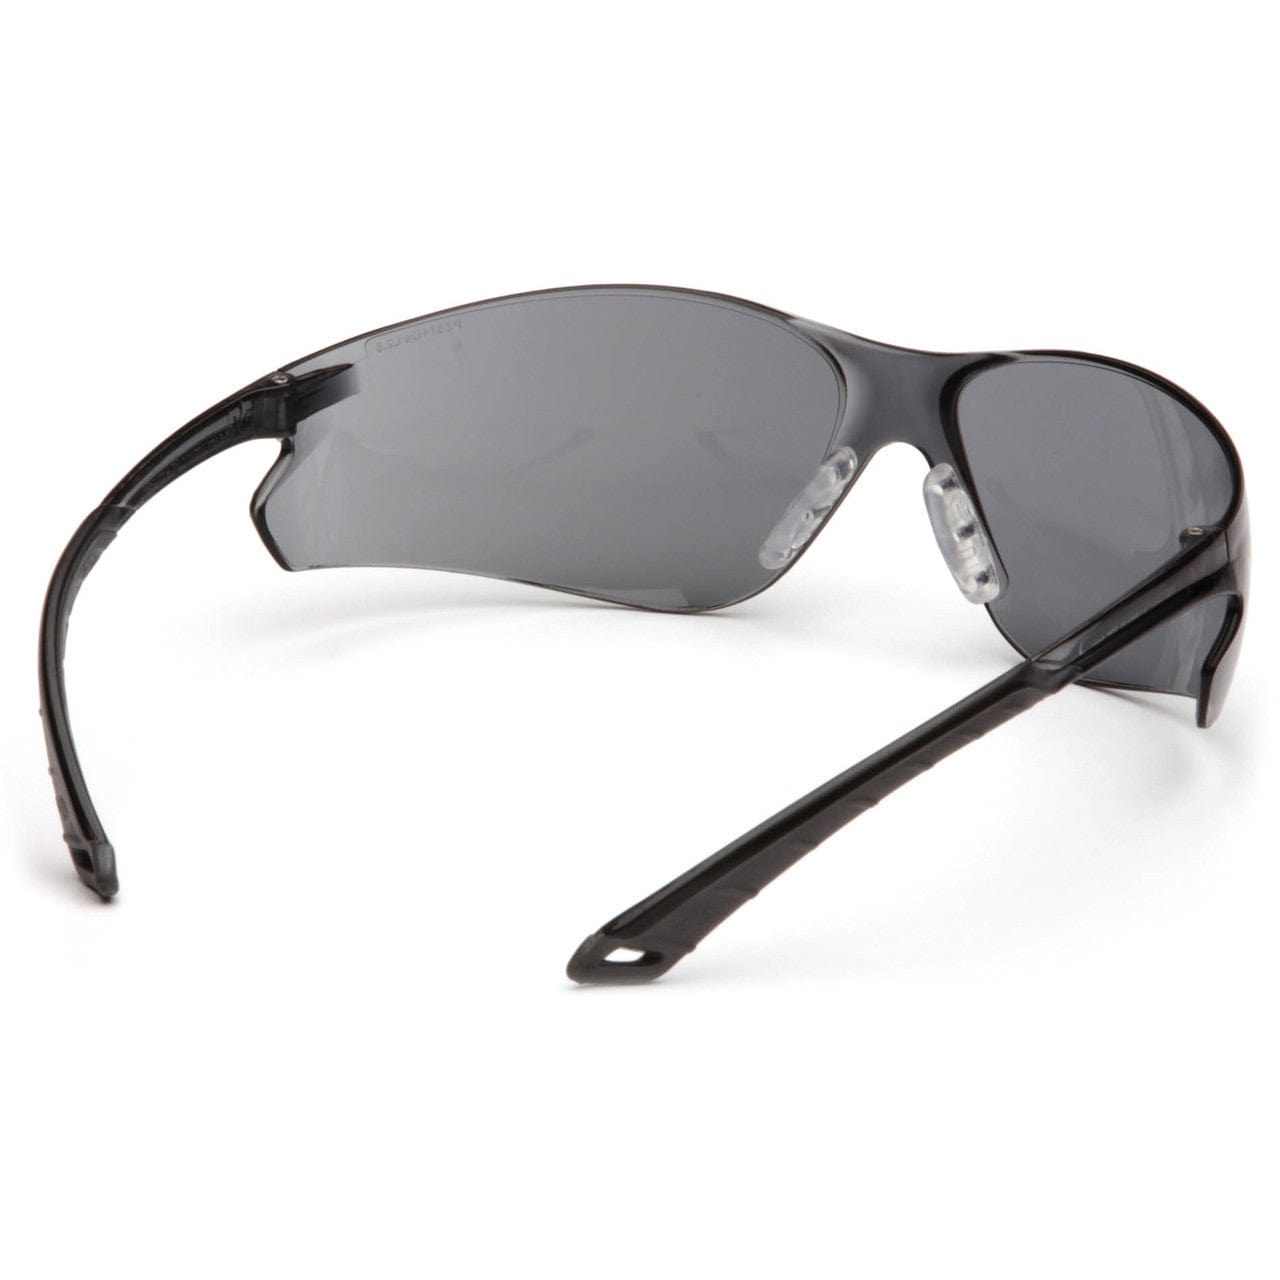 Pyramex Itek Safety Glasses with Gray Anti-Fog Lens S5820ST Inside View